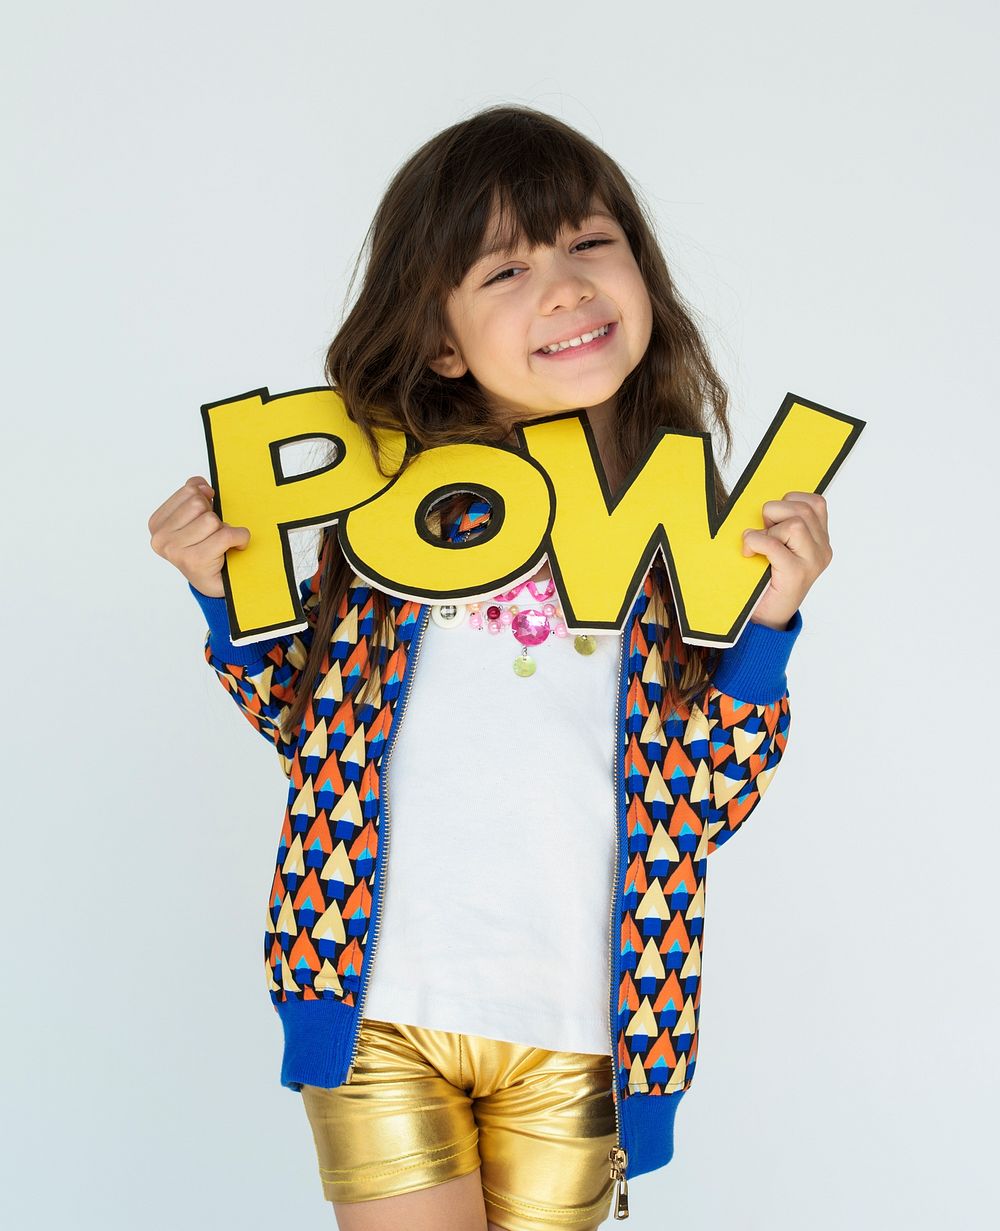 Little Girl Smiling Happiness Holding Comic Word Pow Portrait